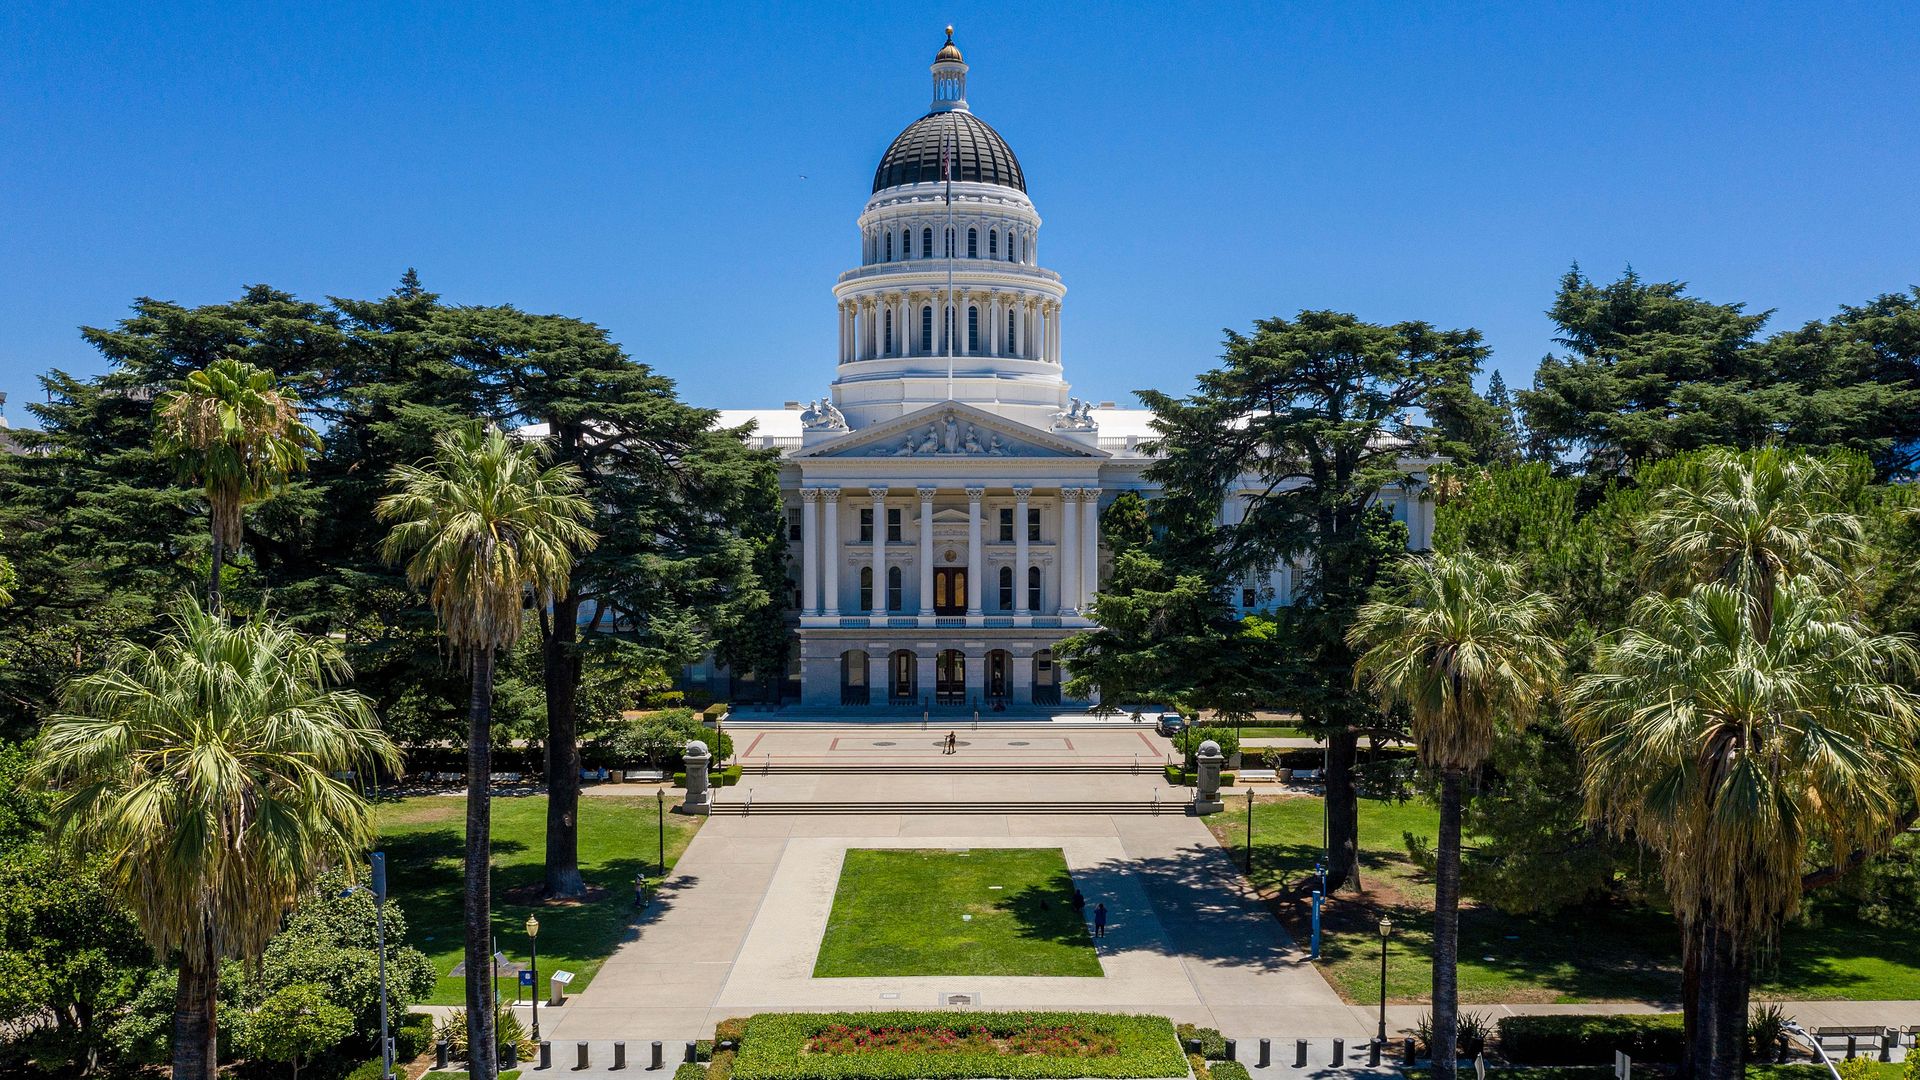 The California State Capitol building in Sacramento, California, U.S., on Wednesday, July 7, 2021.